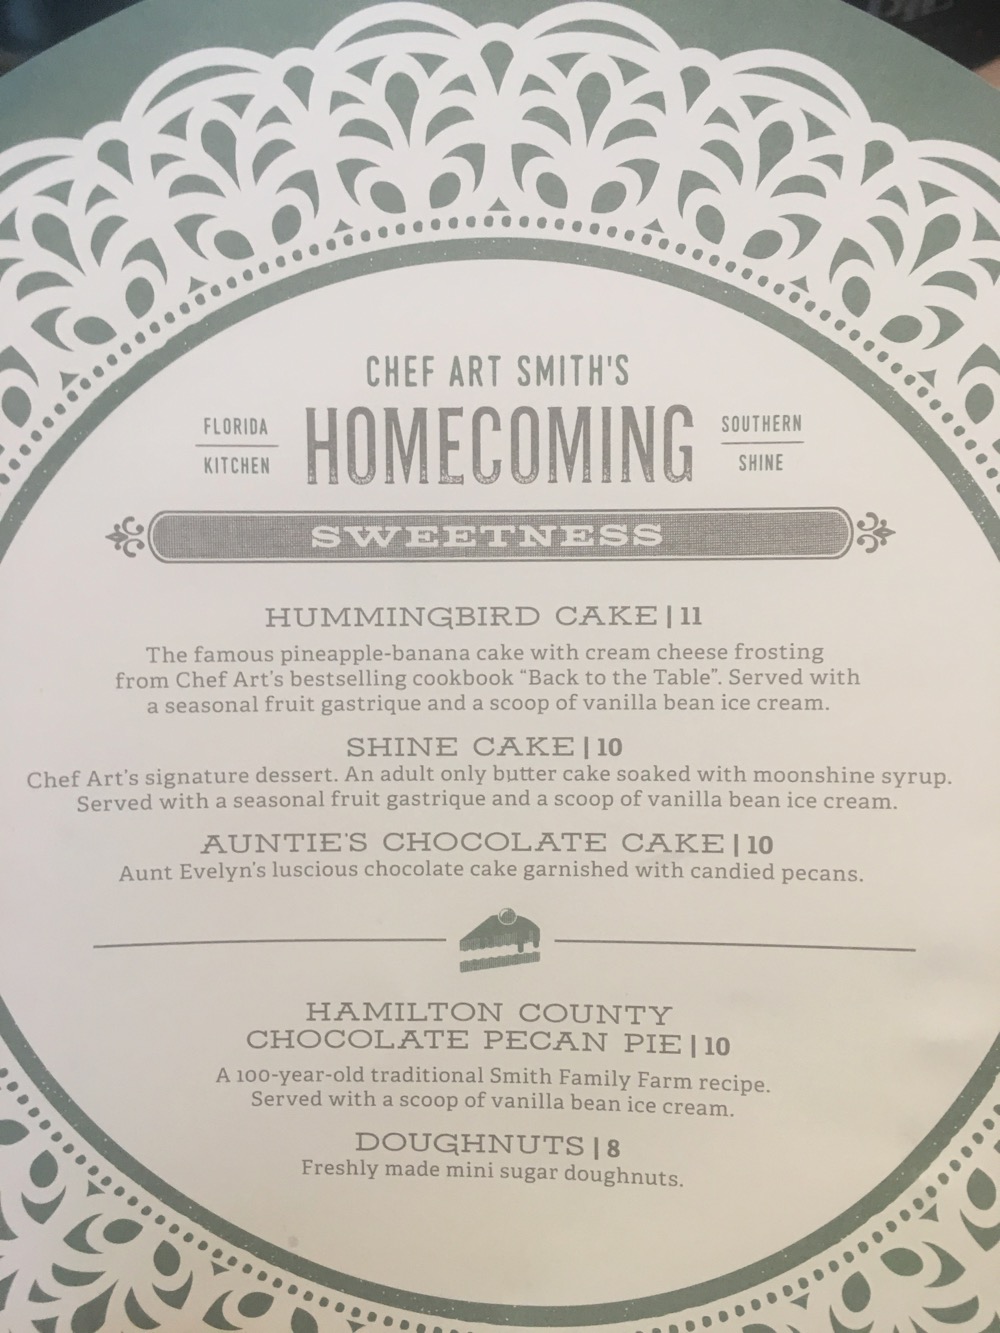 Chef-Art-Smiths-Homecoming-02